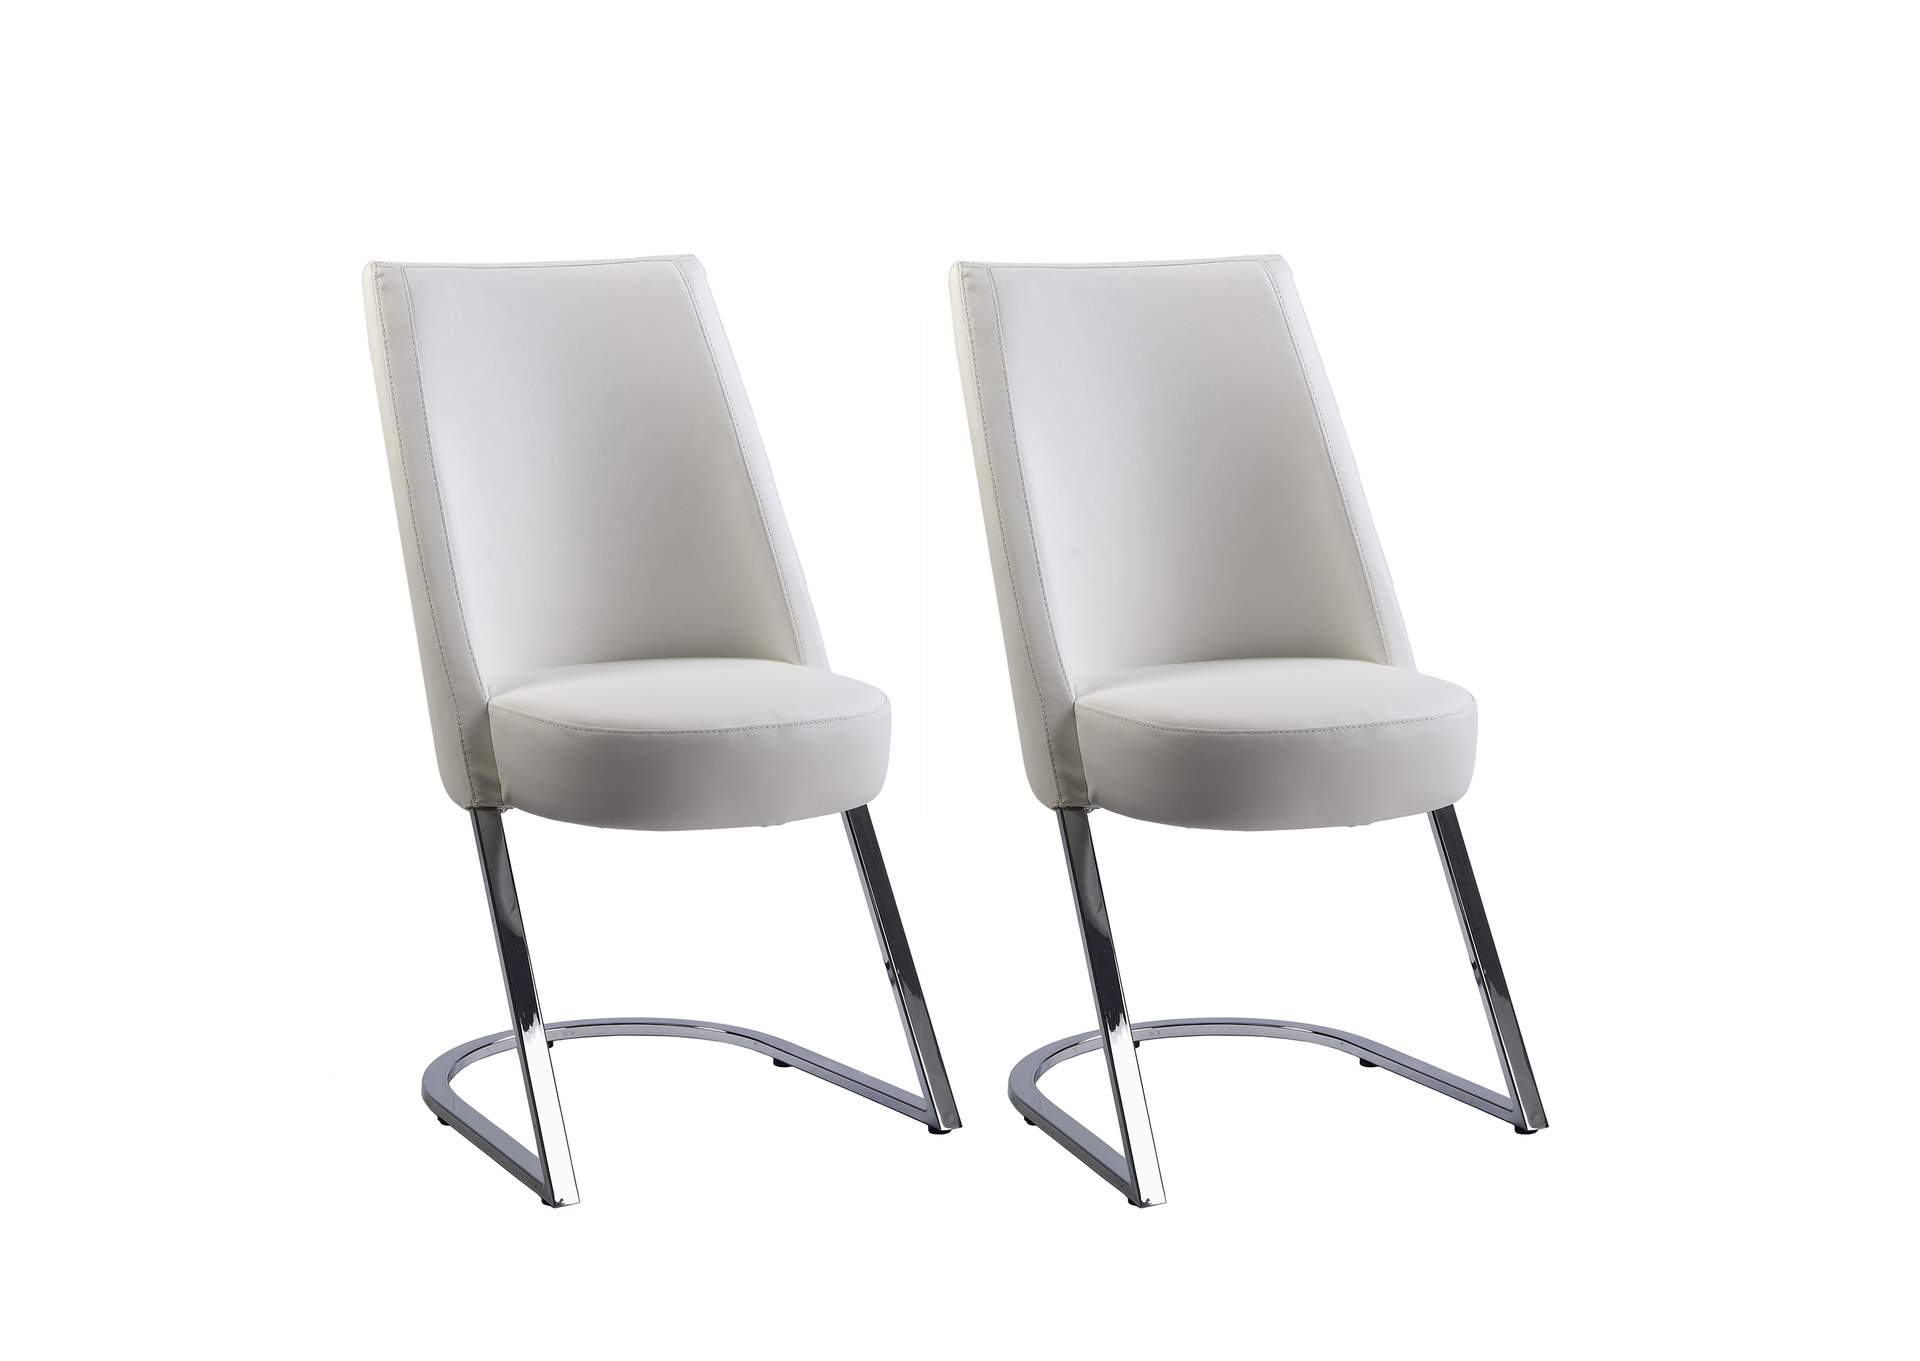 Tami White Slight Concave-Back Side Chair (Set of 2),Chintaly Imports